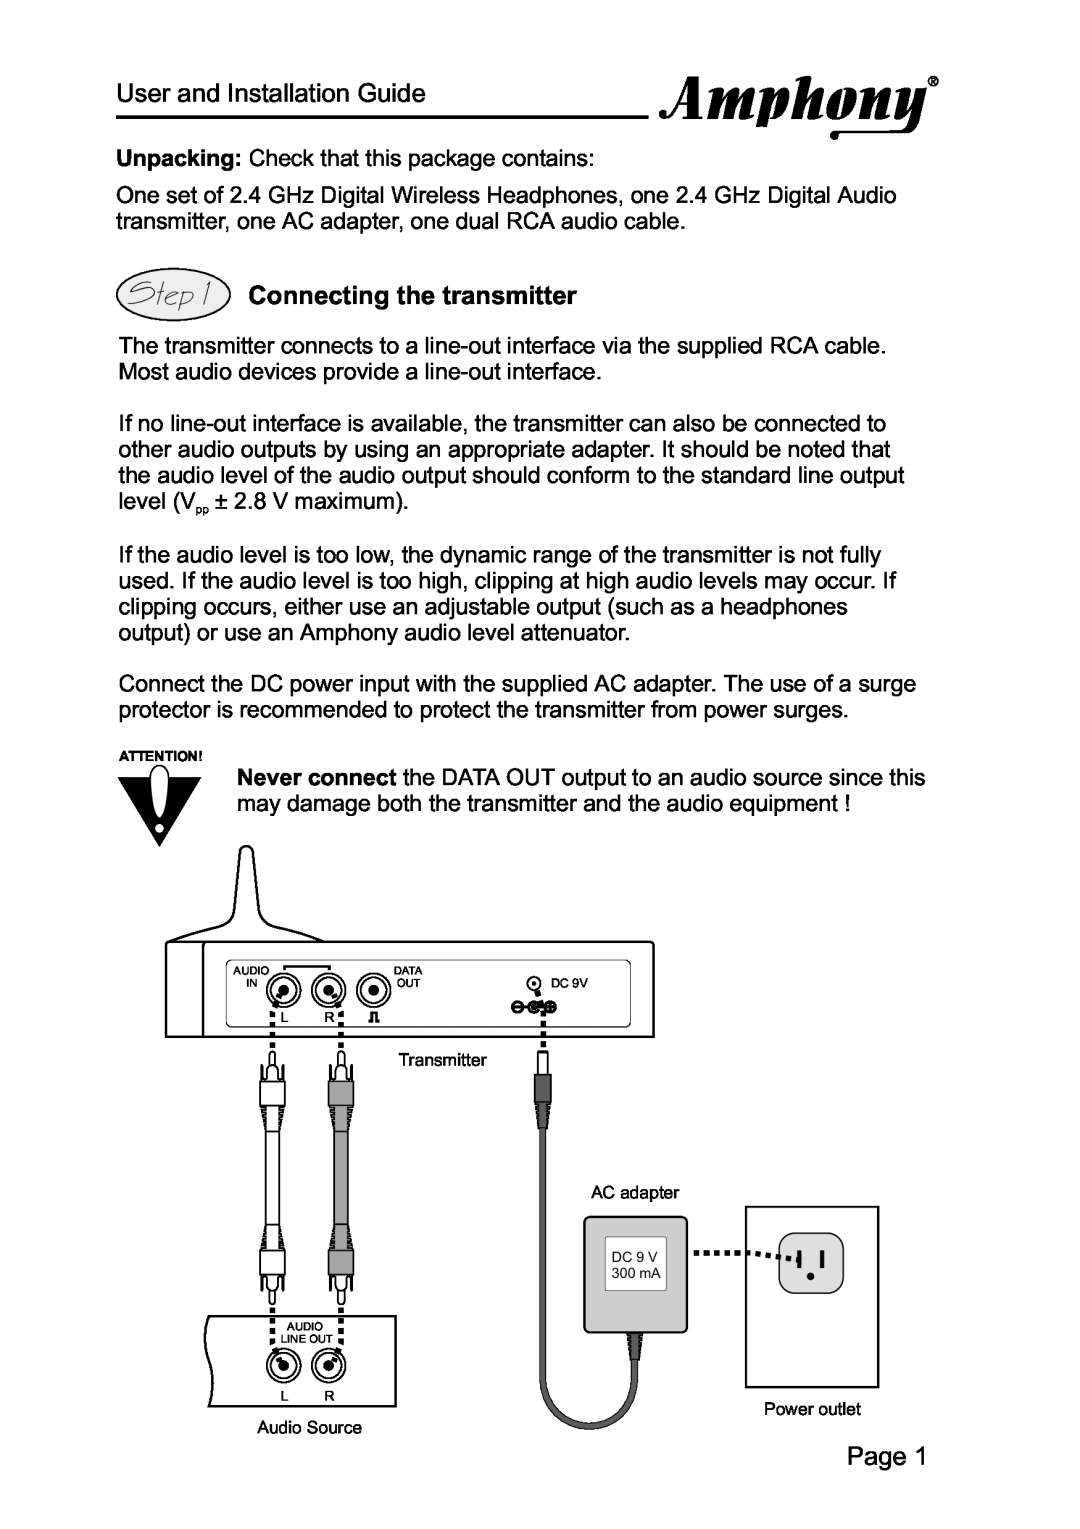 Amphony 1000 manual User and Installation Guide, Connecting the transmitter, Page 